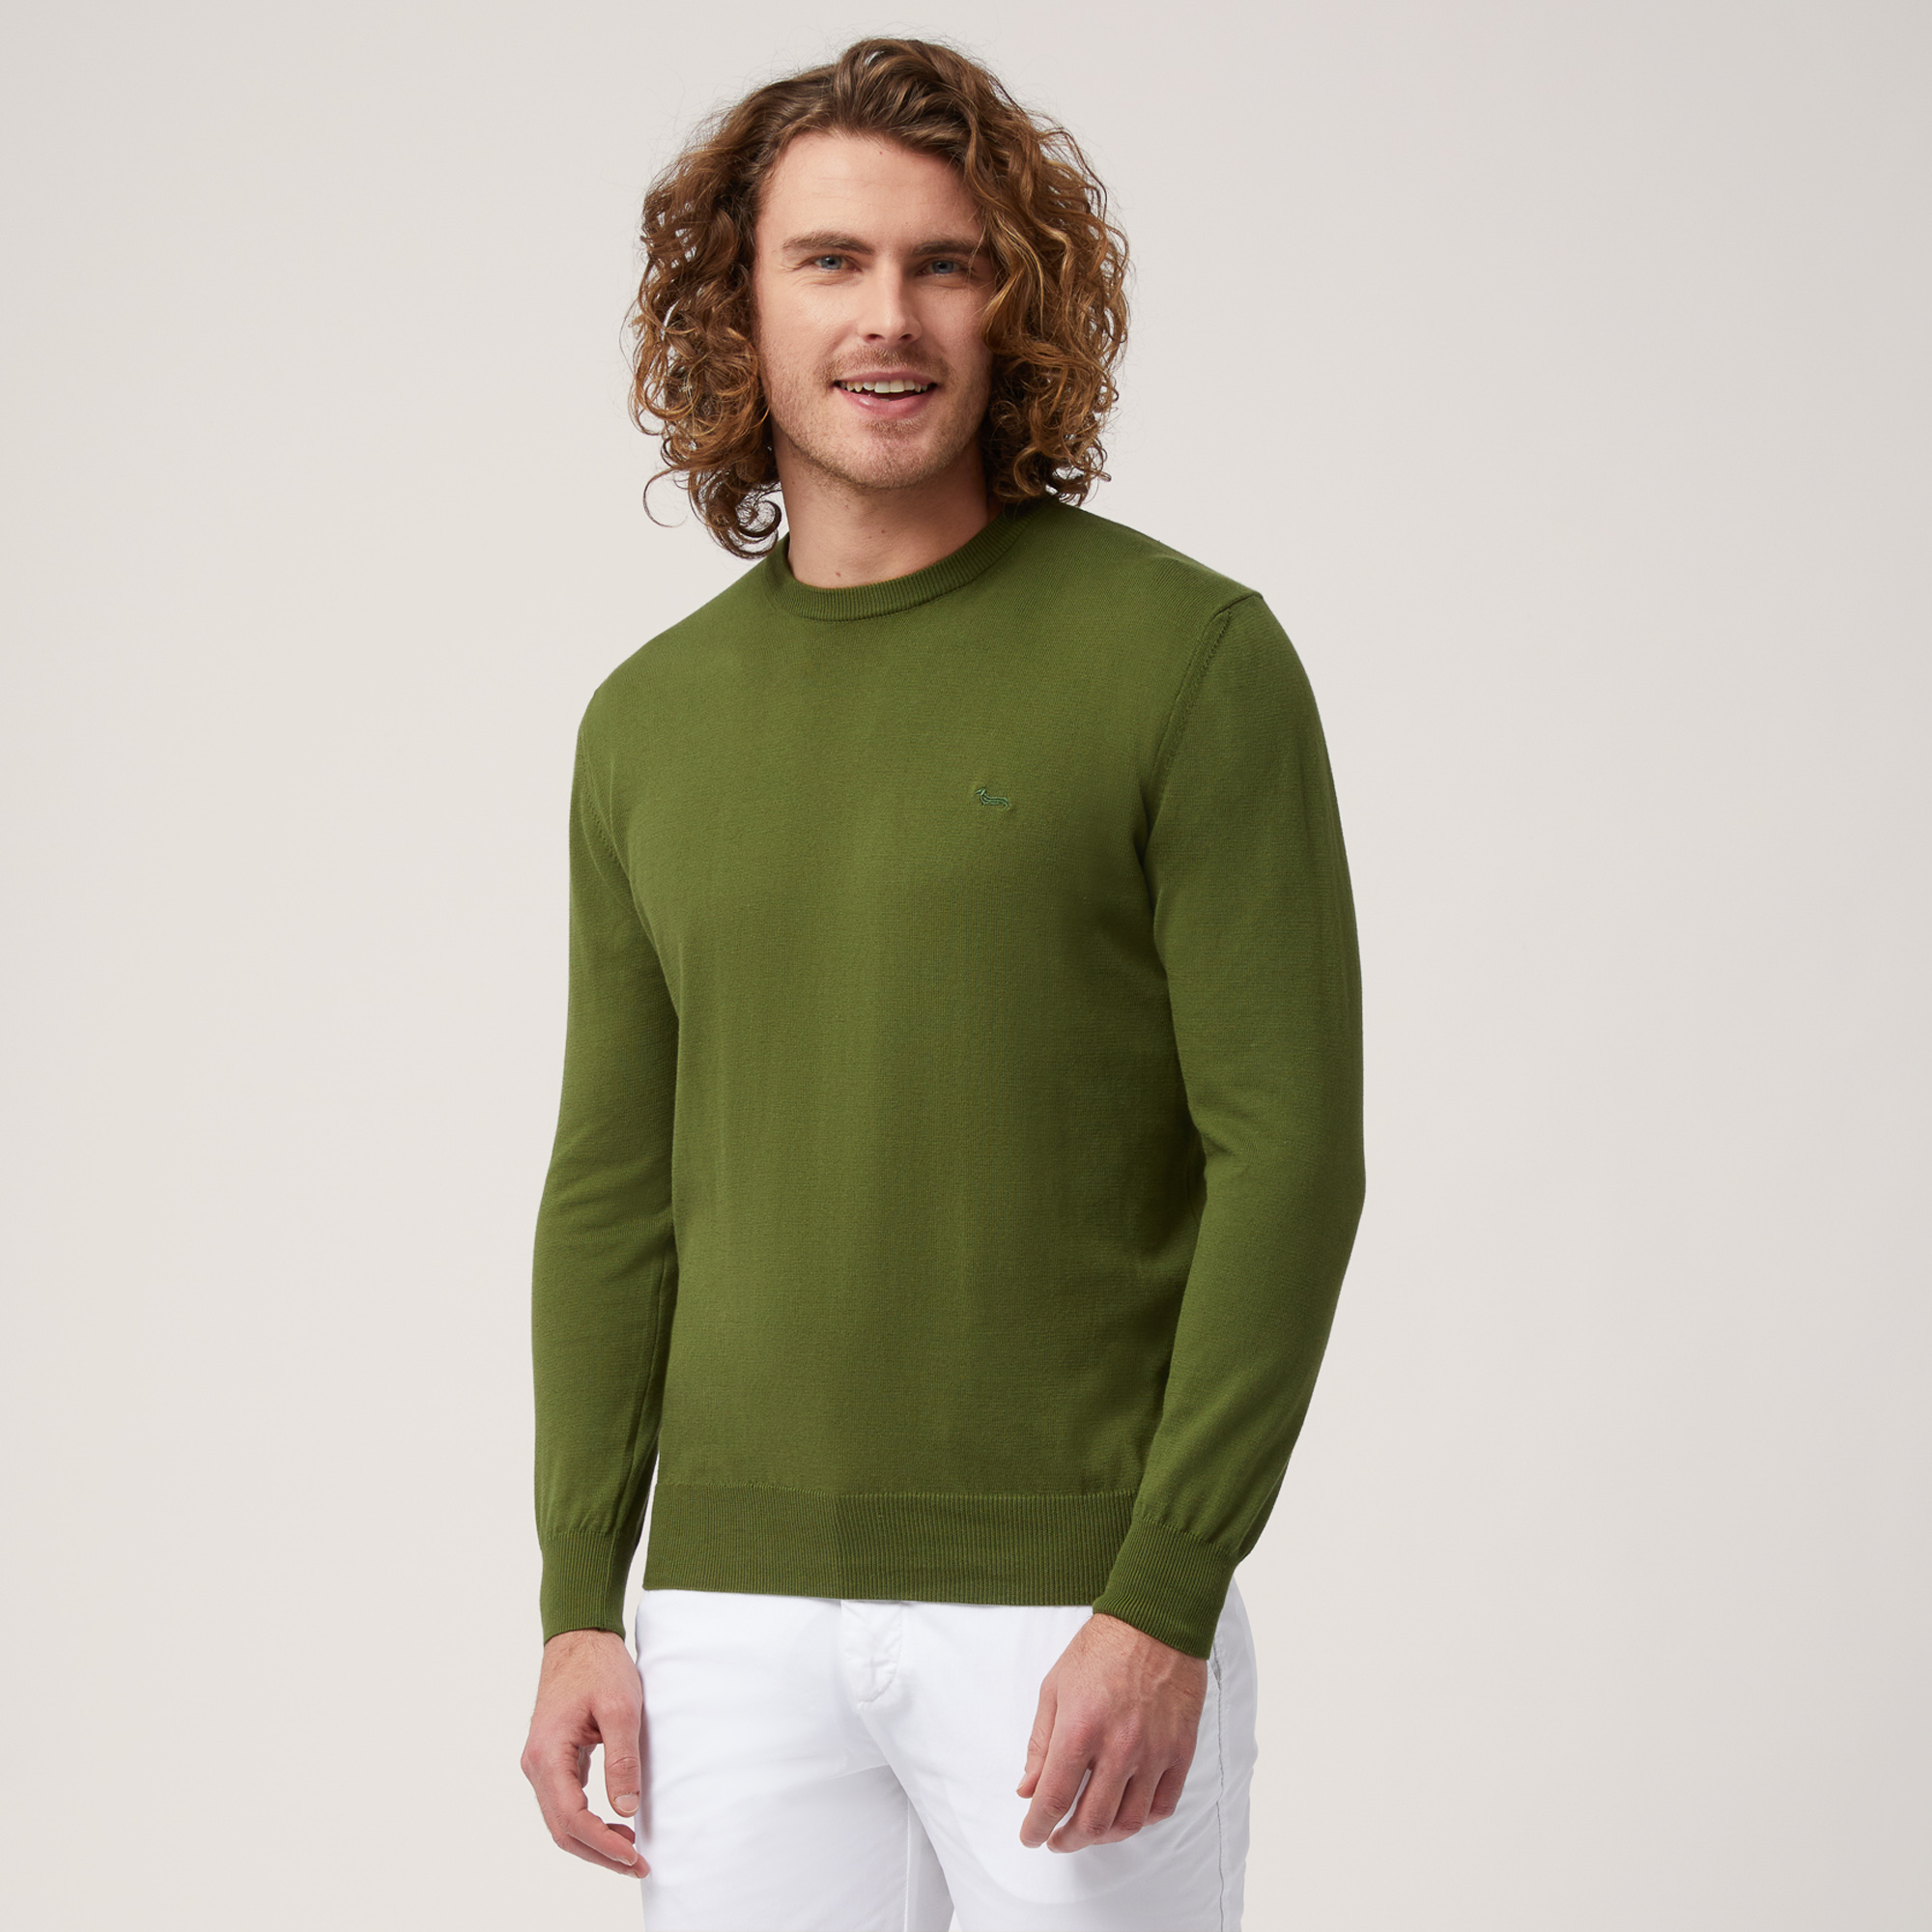 Cotton Crew Neck Pullover, Green, large